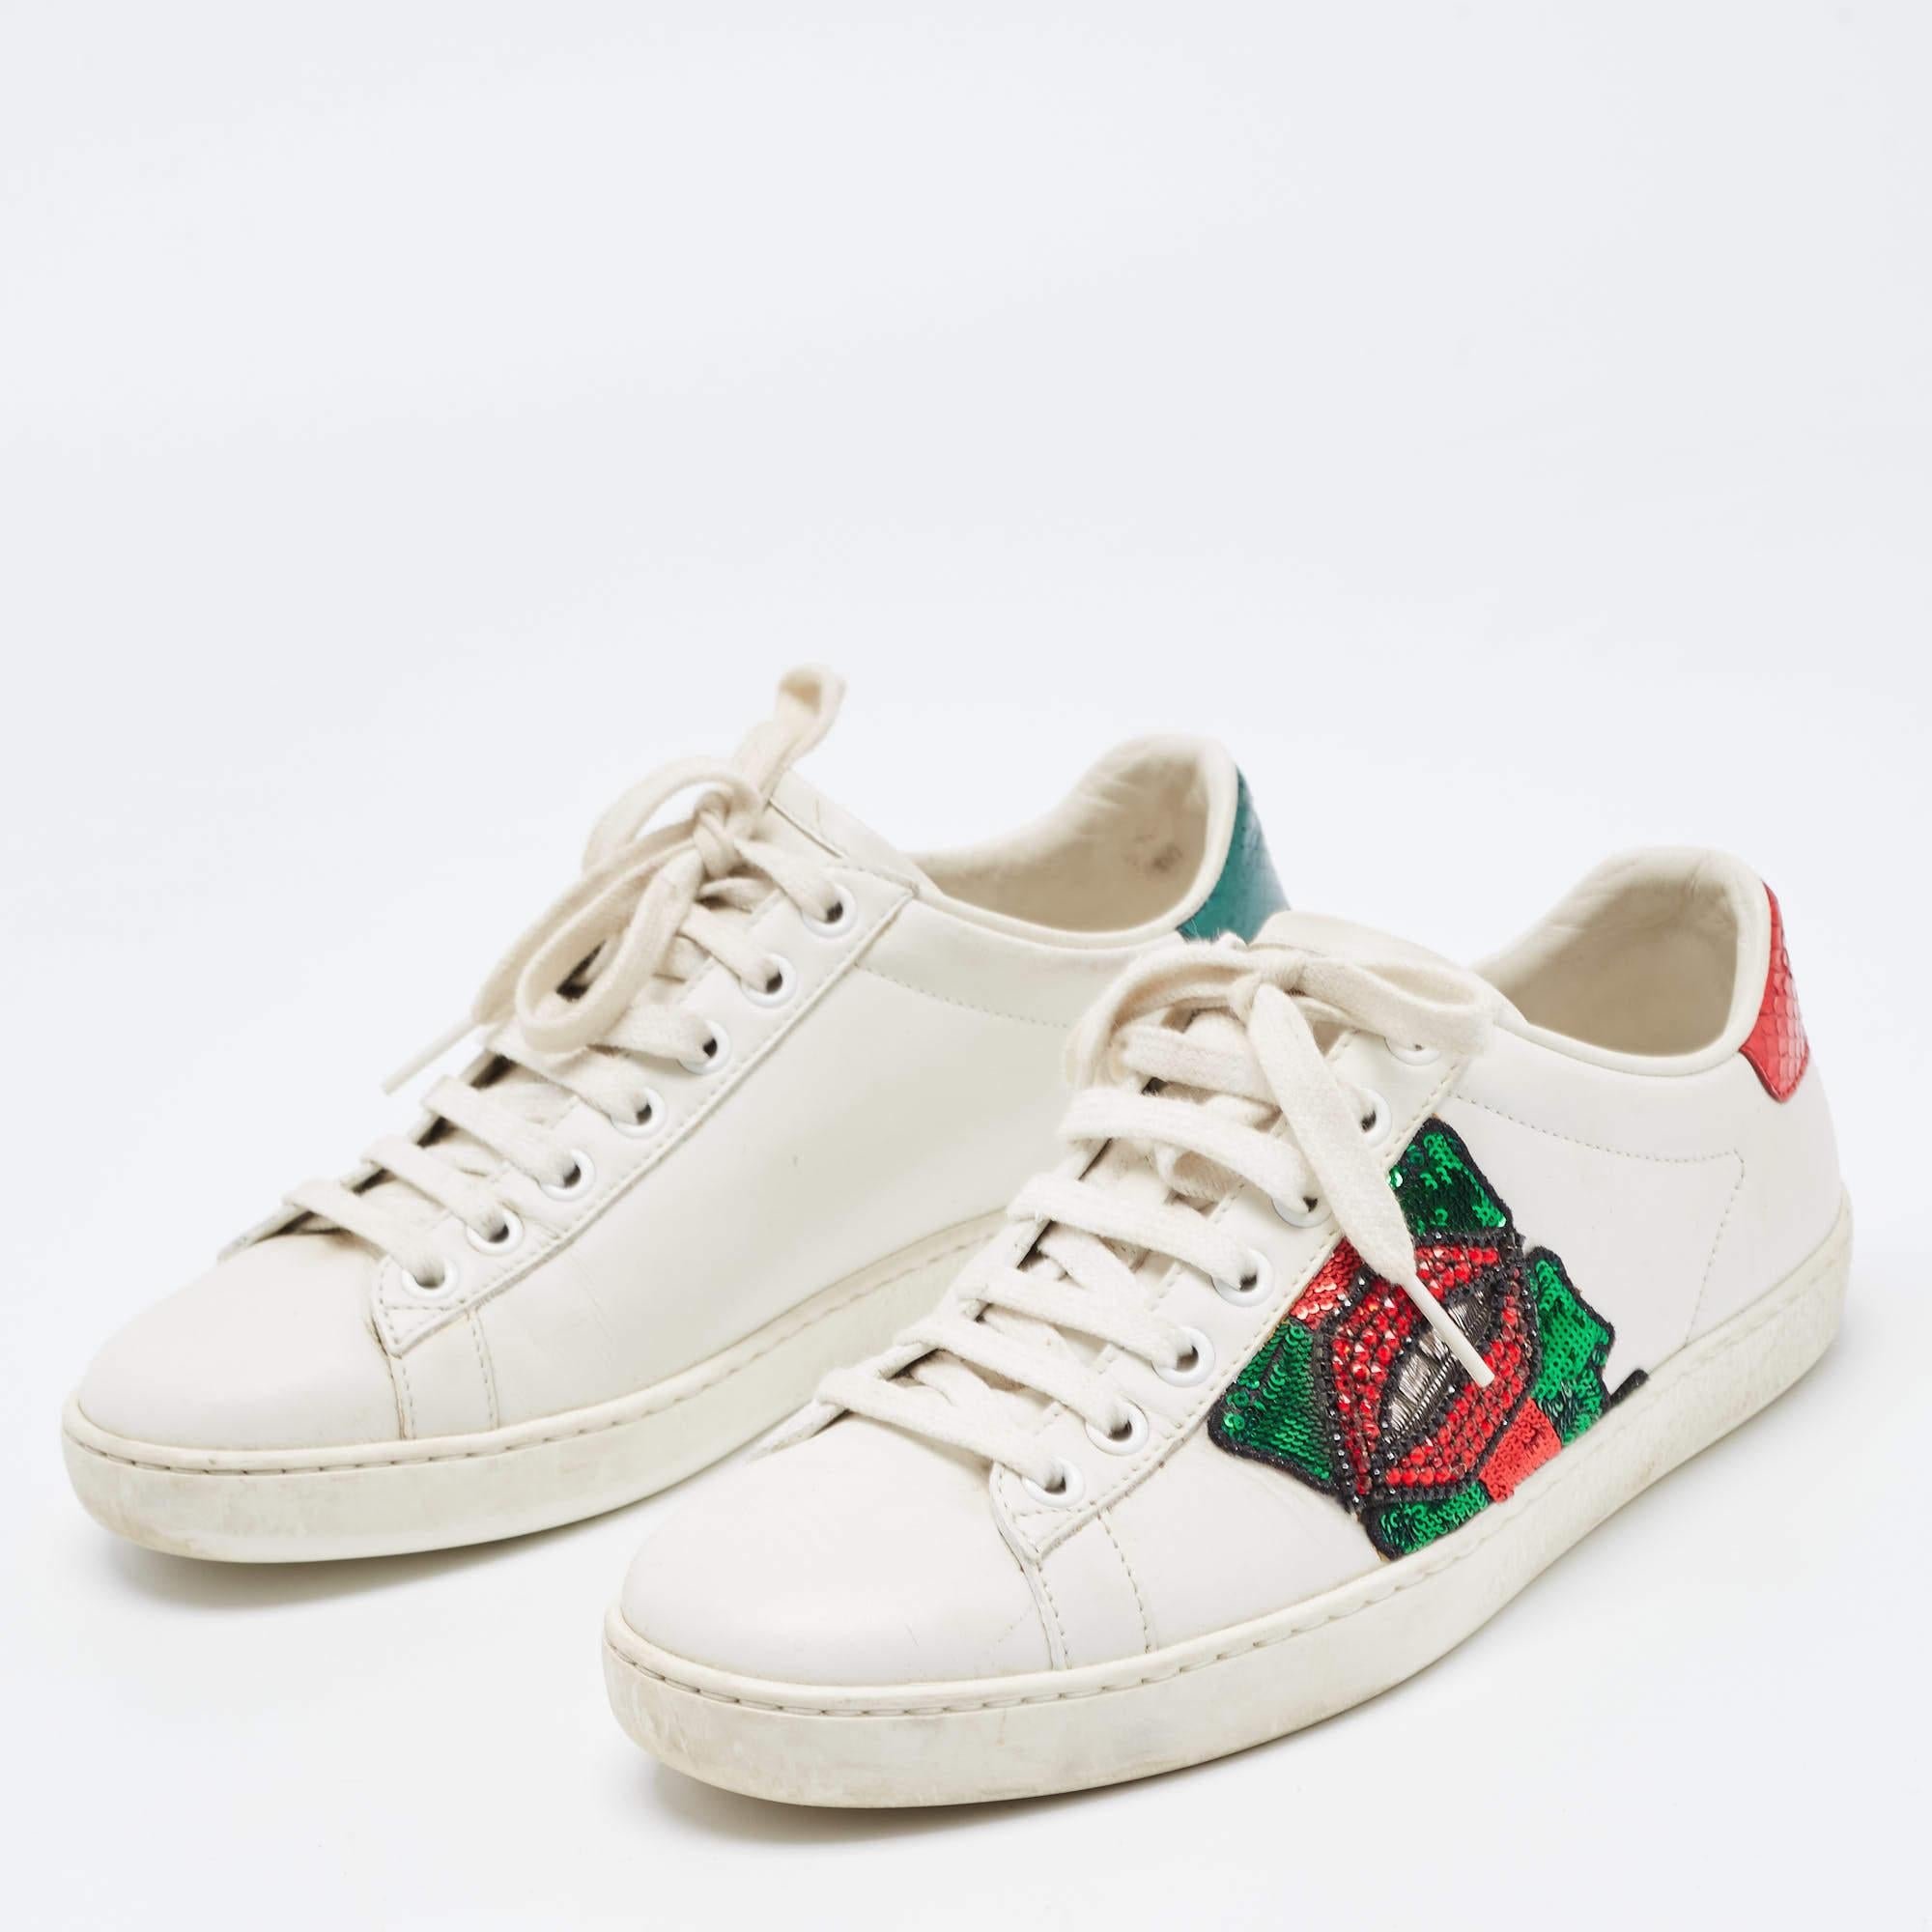 Gucci White Leather Embellished Lip Ace Sneakers Size 36 In Good Condition For Sale In Dubai, Al Qouz 2